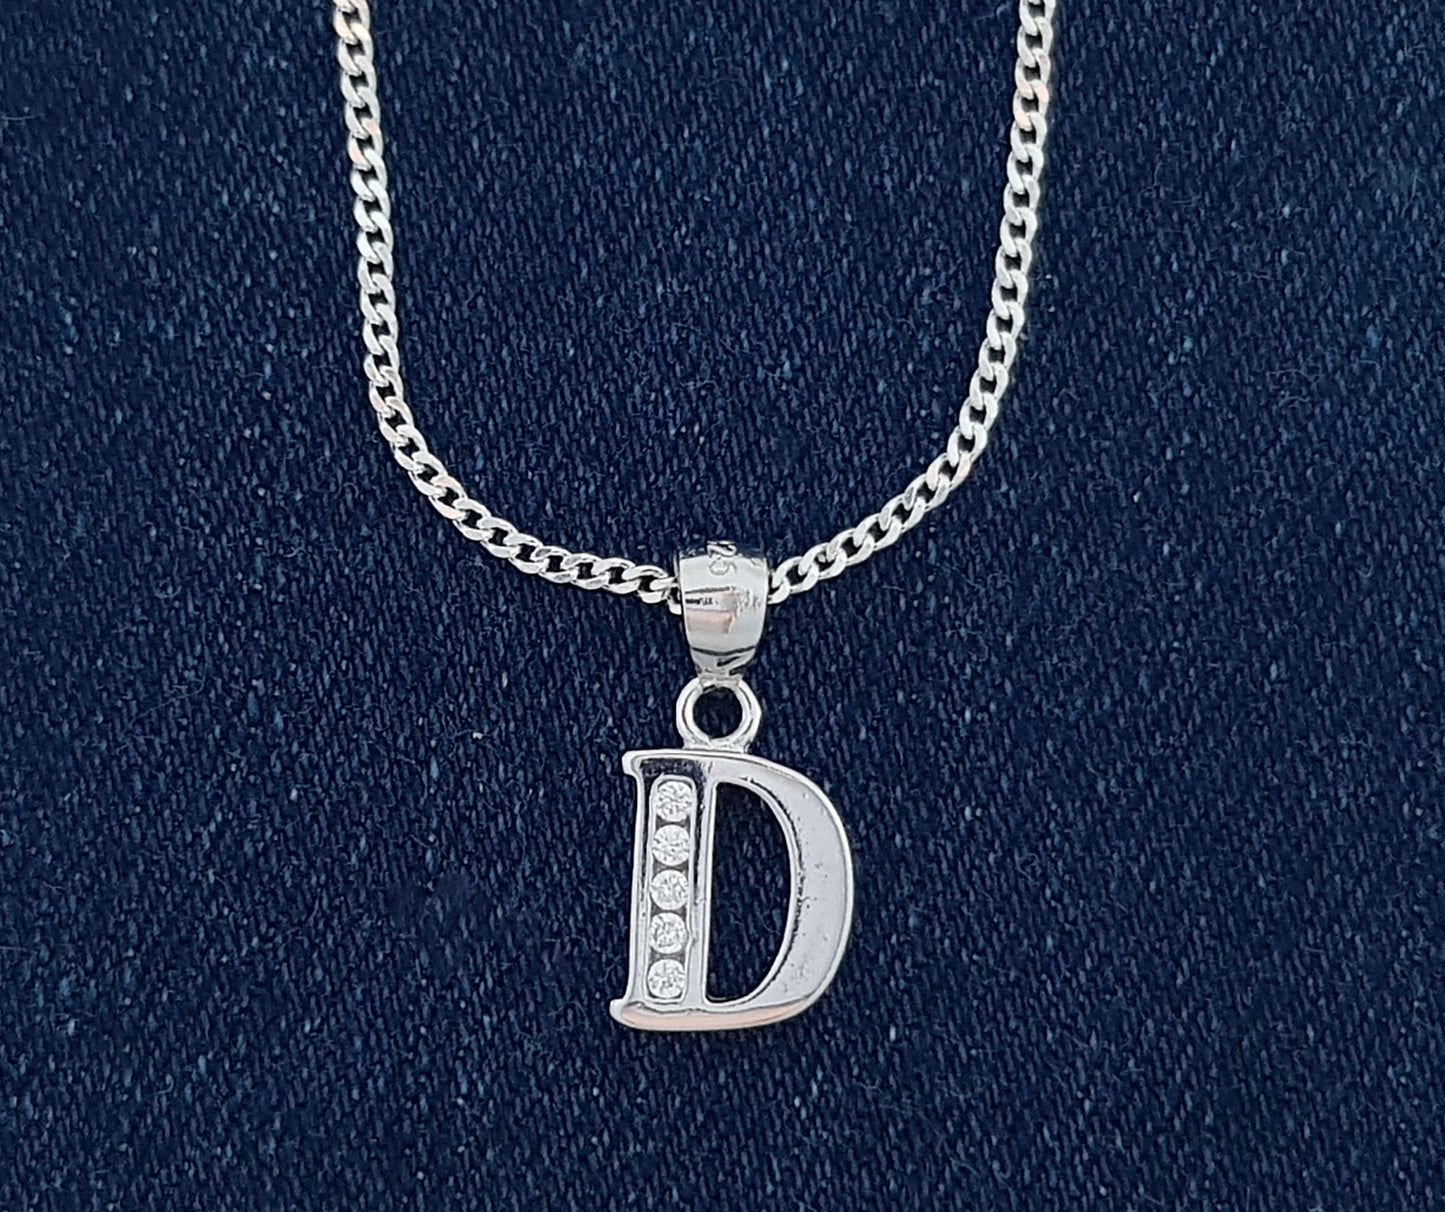 Sterling Silver Initial with Cubic Zirconia Stones- "D" Initial or Letter